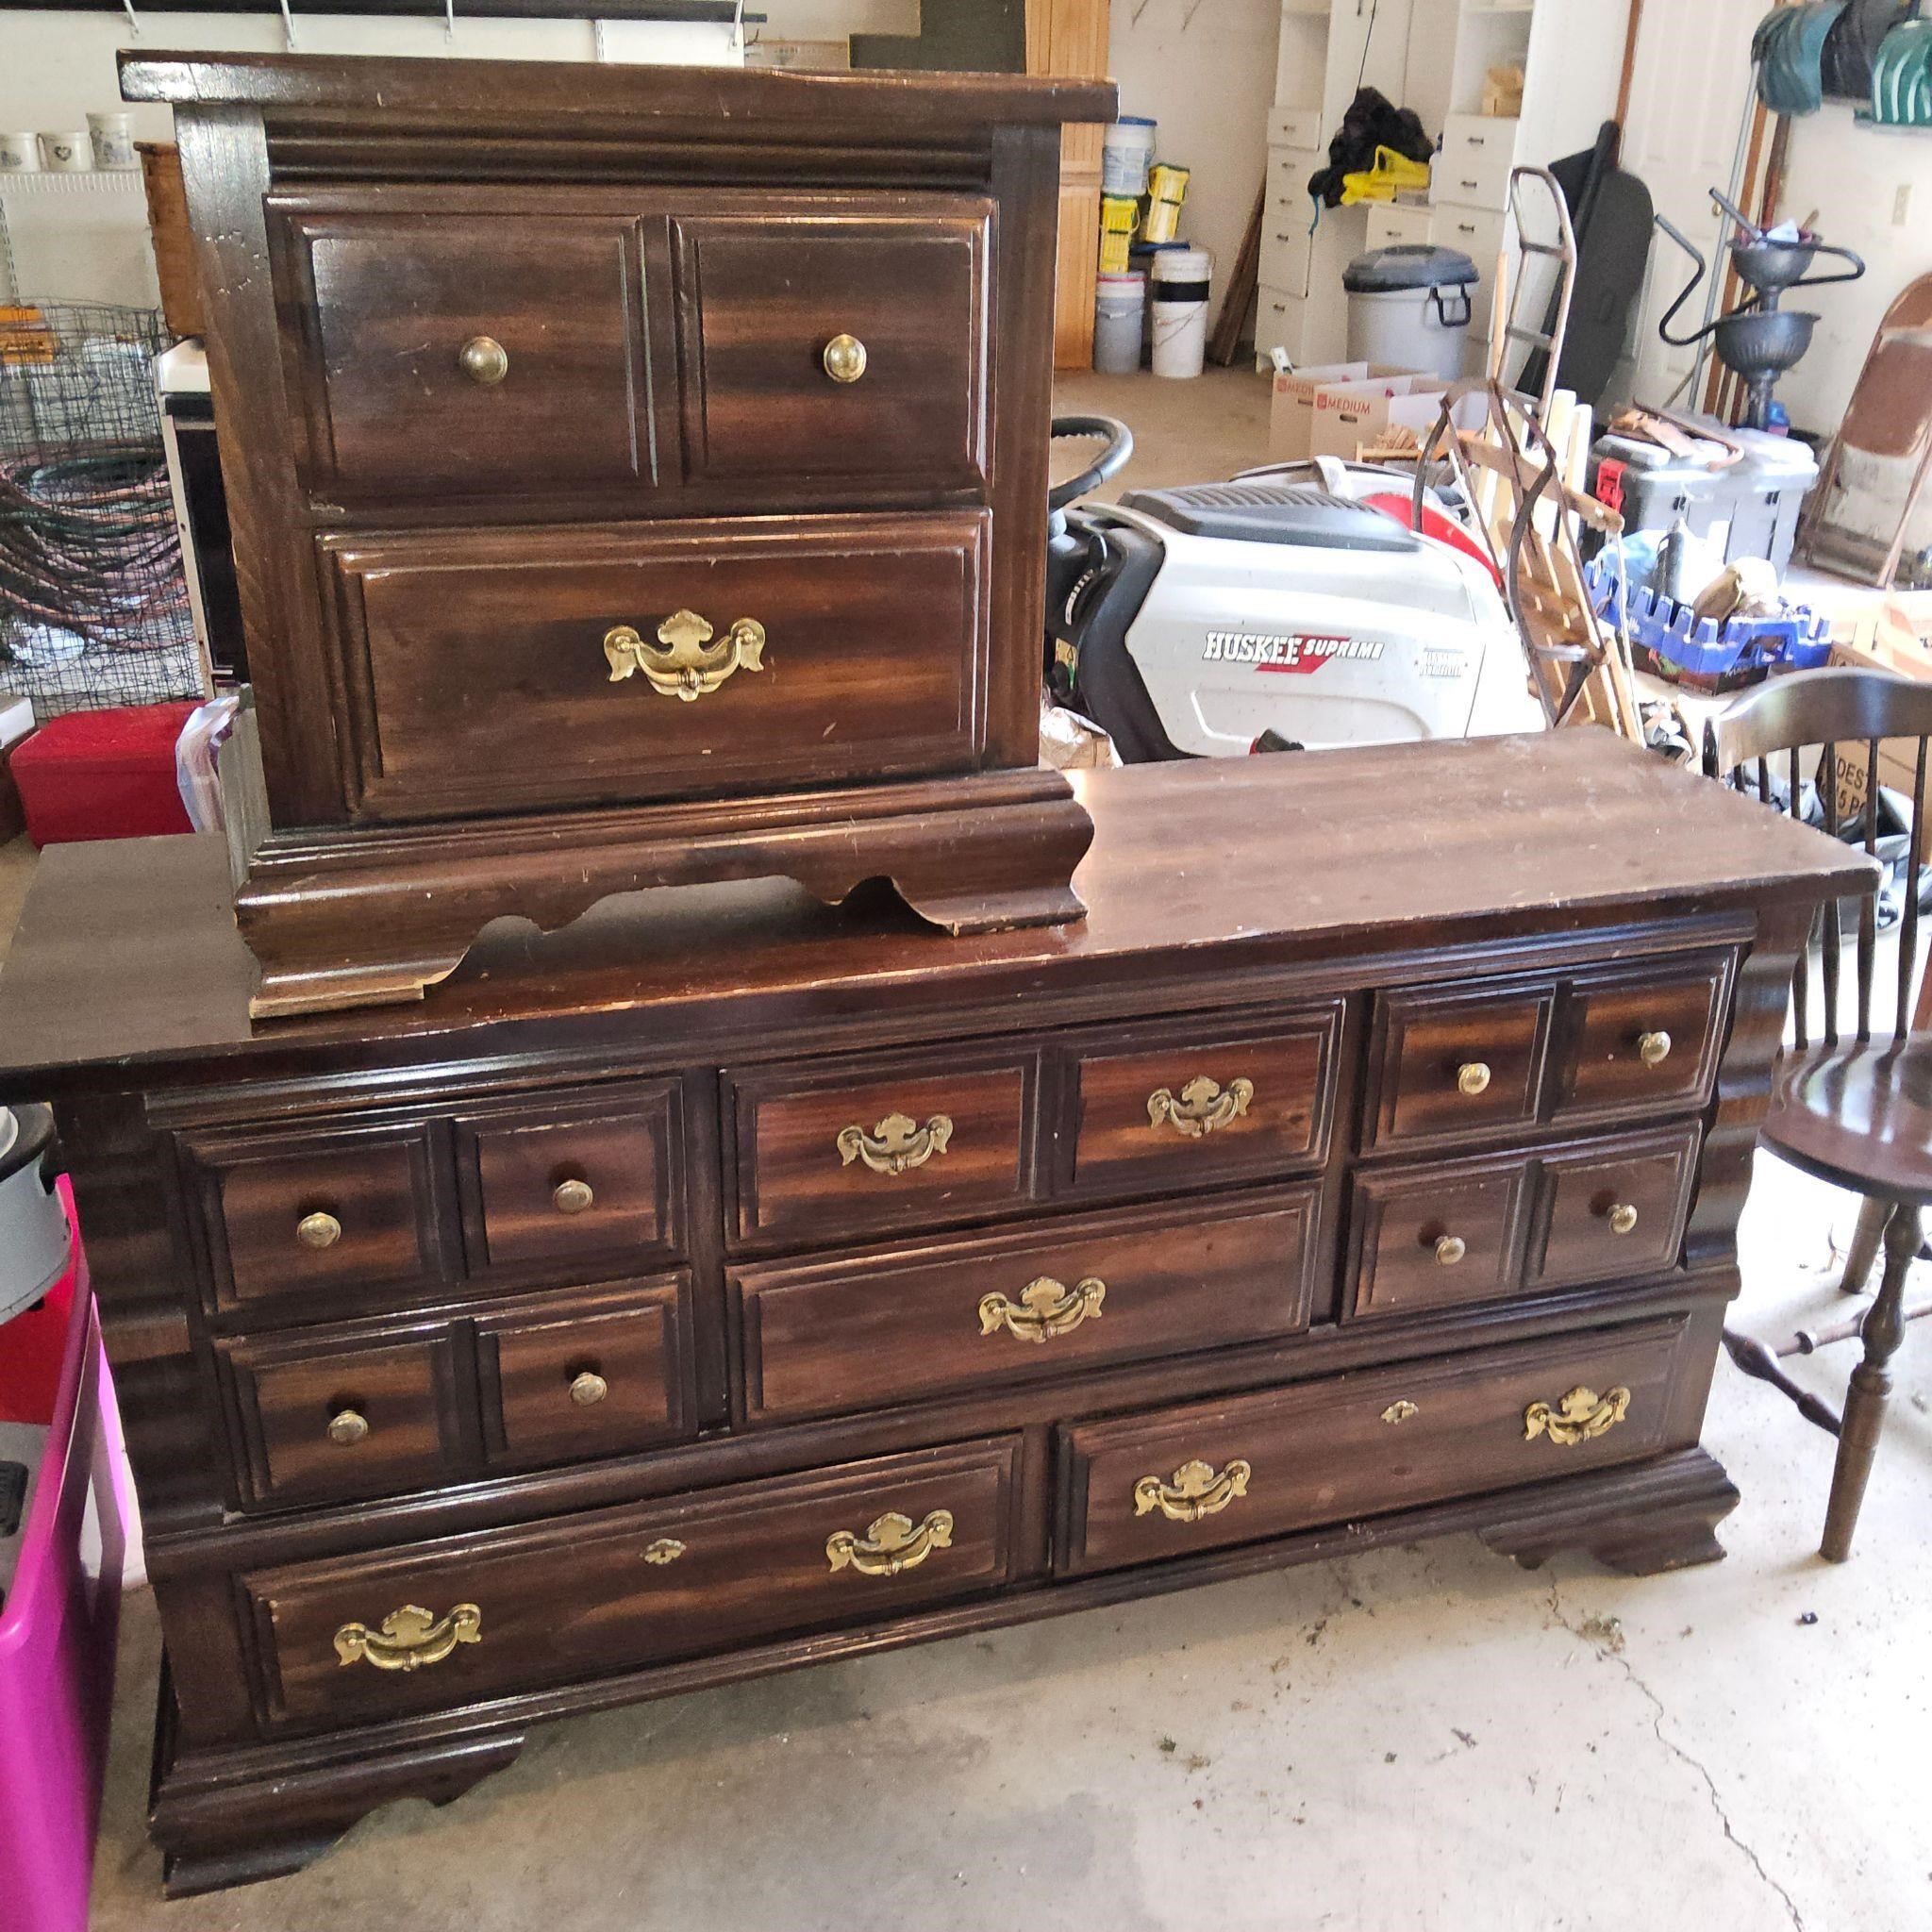 FREDERICKTOWN ONLINE ONLY MOVING AUCTION